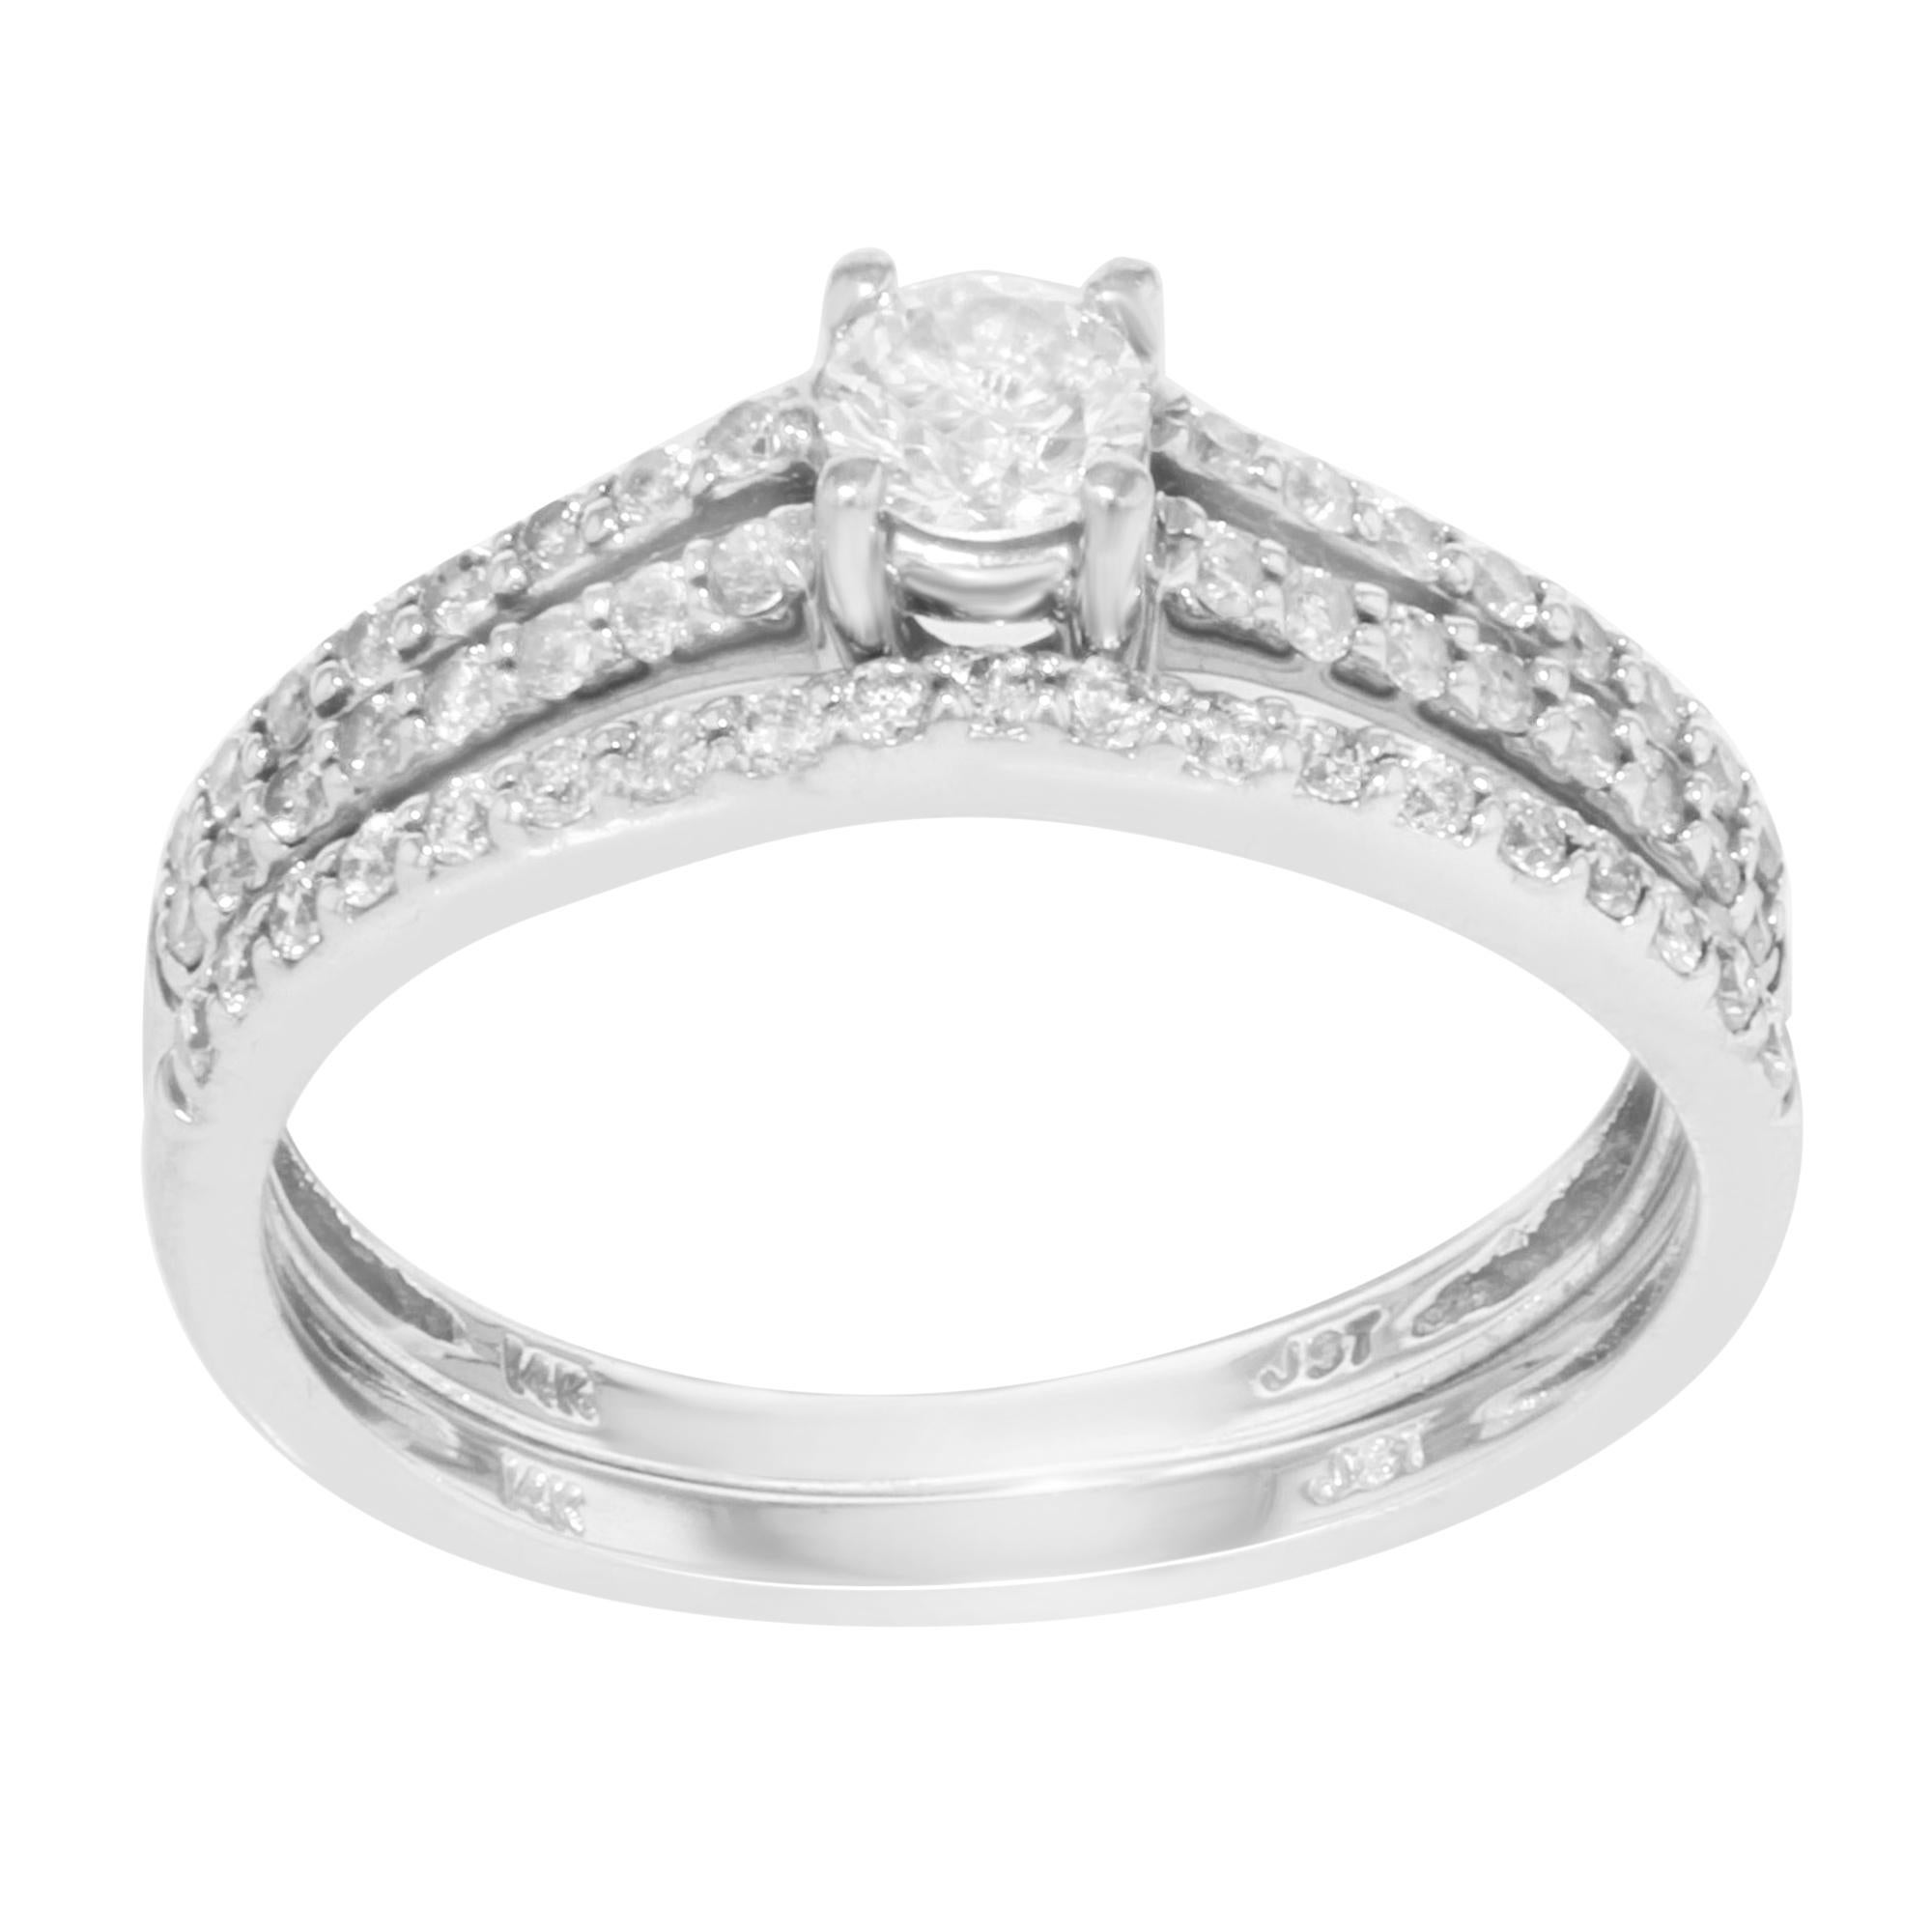 Diamond Womens Engagement Ring Band Set 14K White Gold 0.65 Cttw For Sale